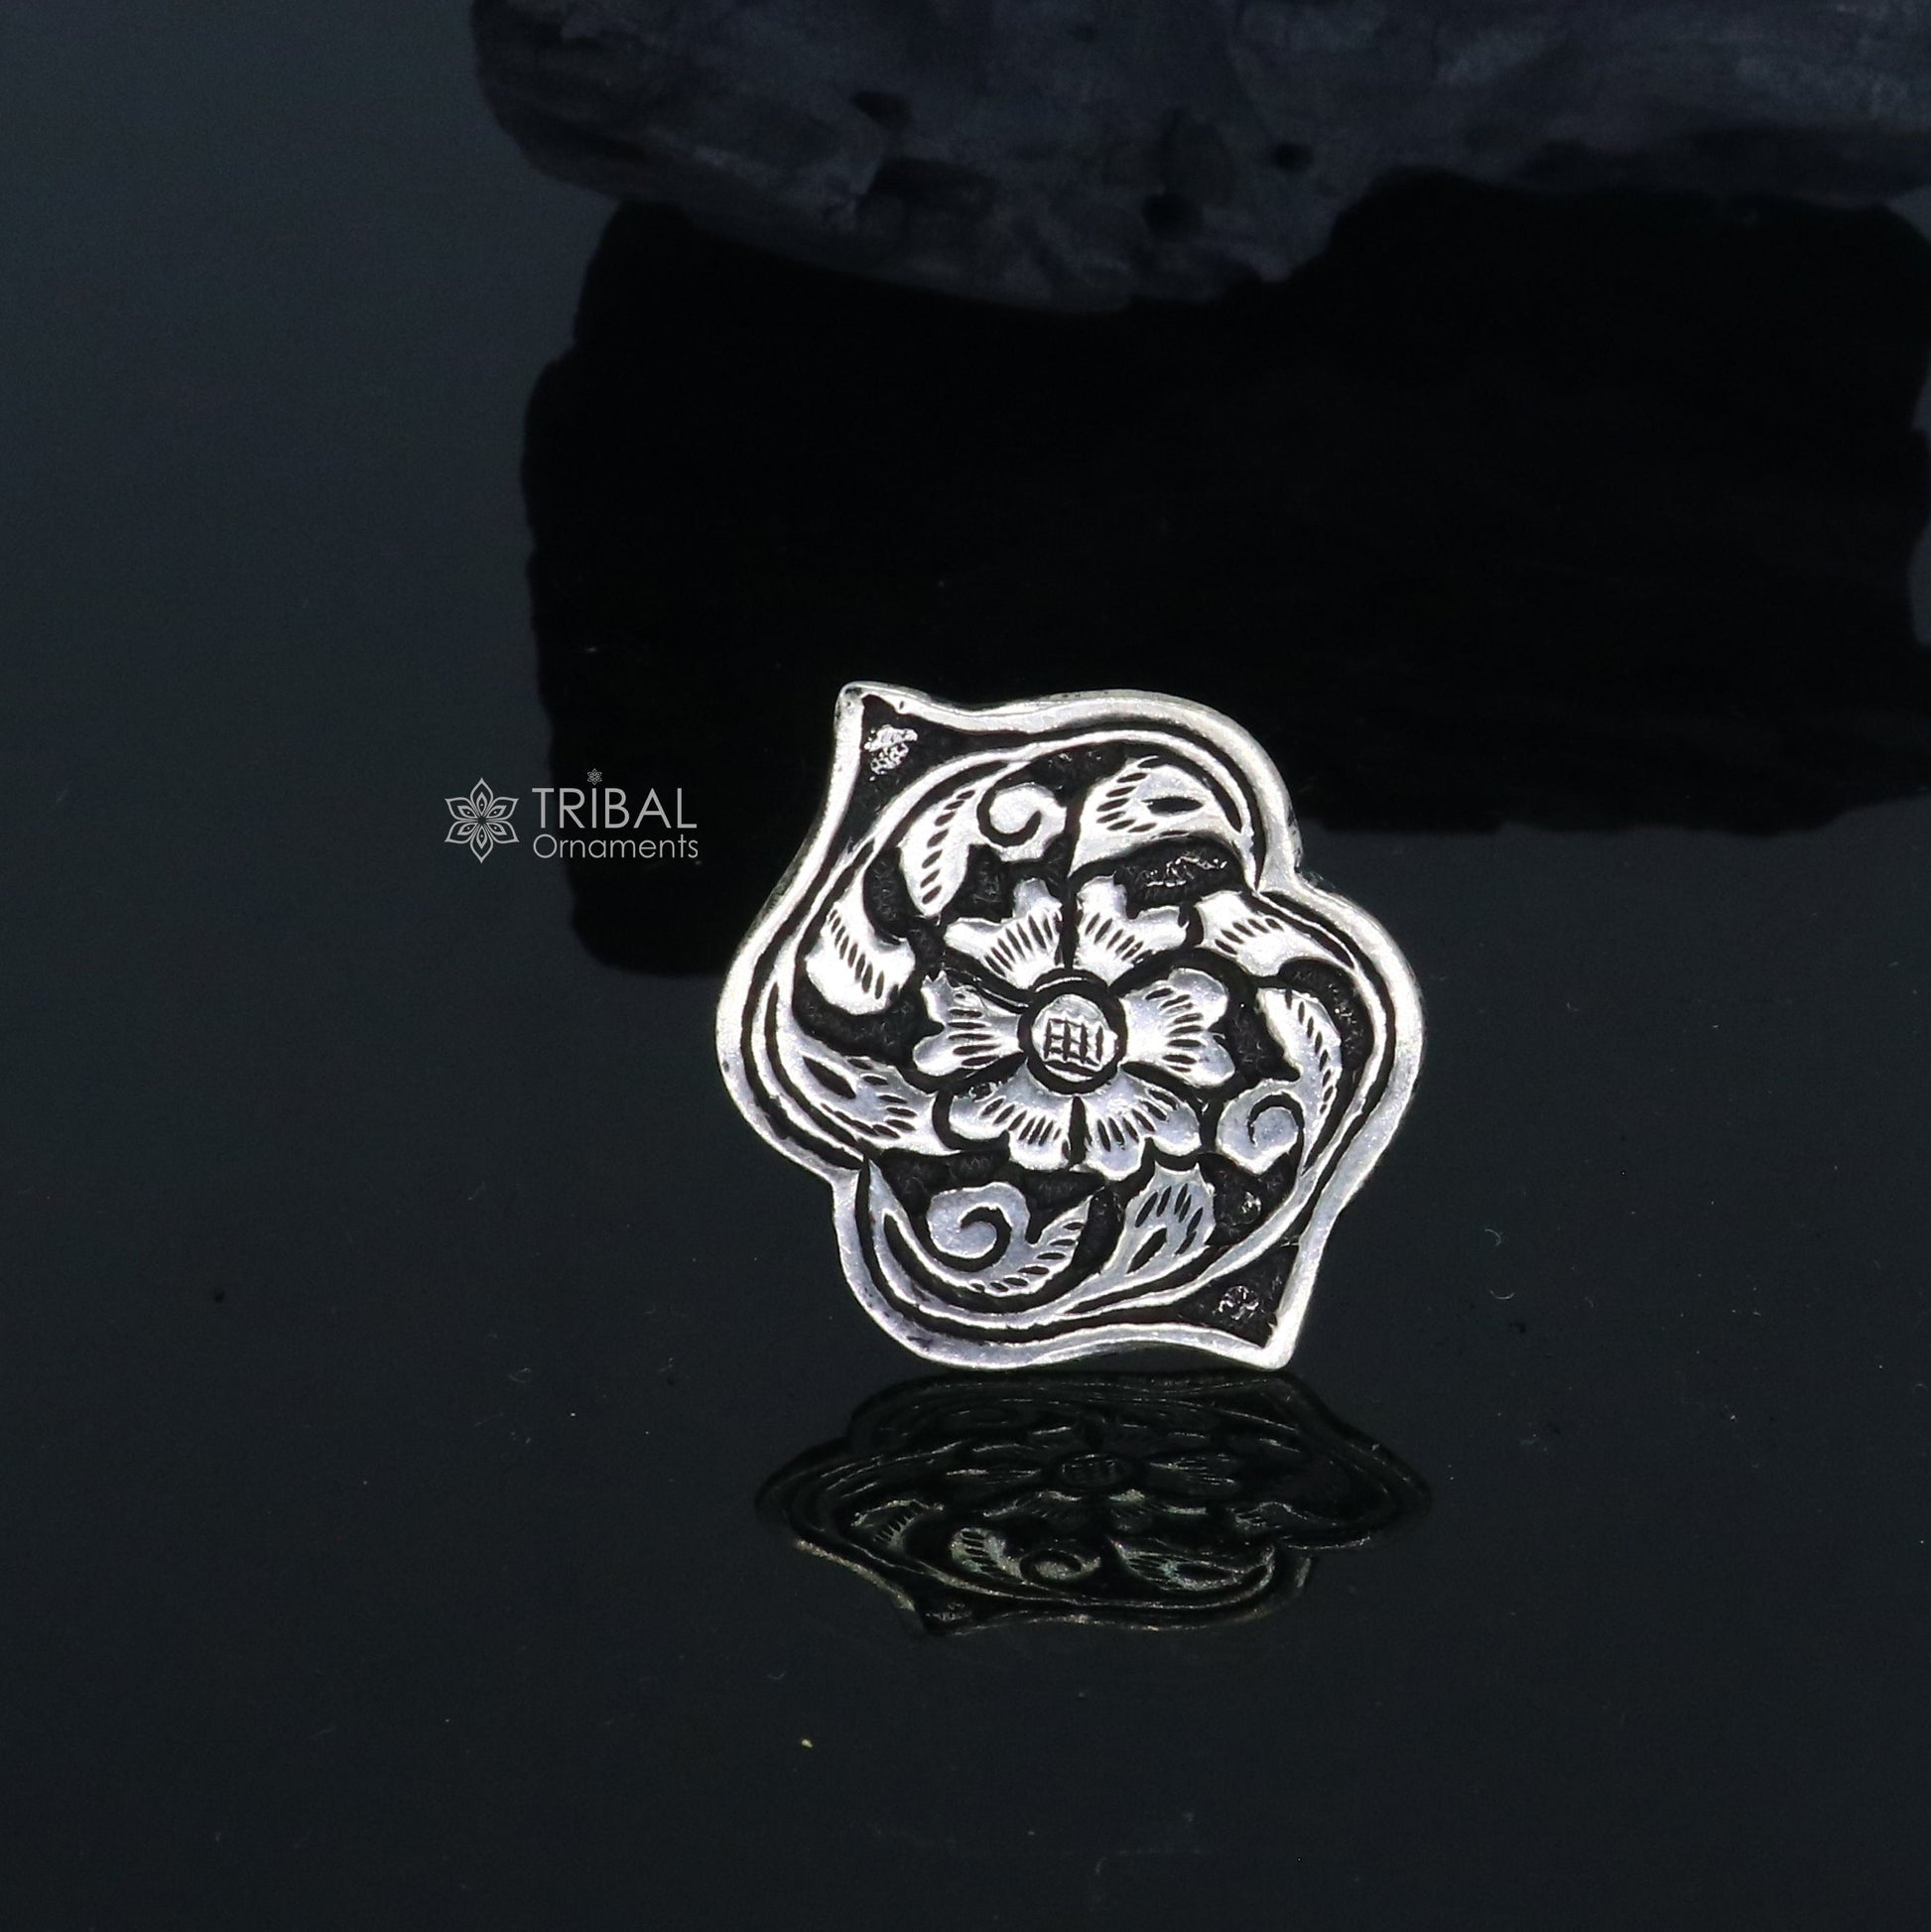 Traditional cultural flower design 925 sterling silver adjustable ring, best tribal ethnic jewelry for belly dance Navratri jewelry sr384 - TRIBAL ORNAMENTS